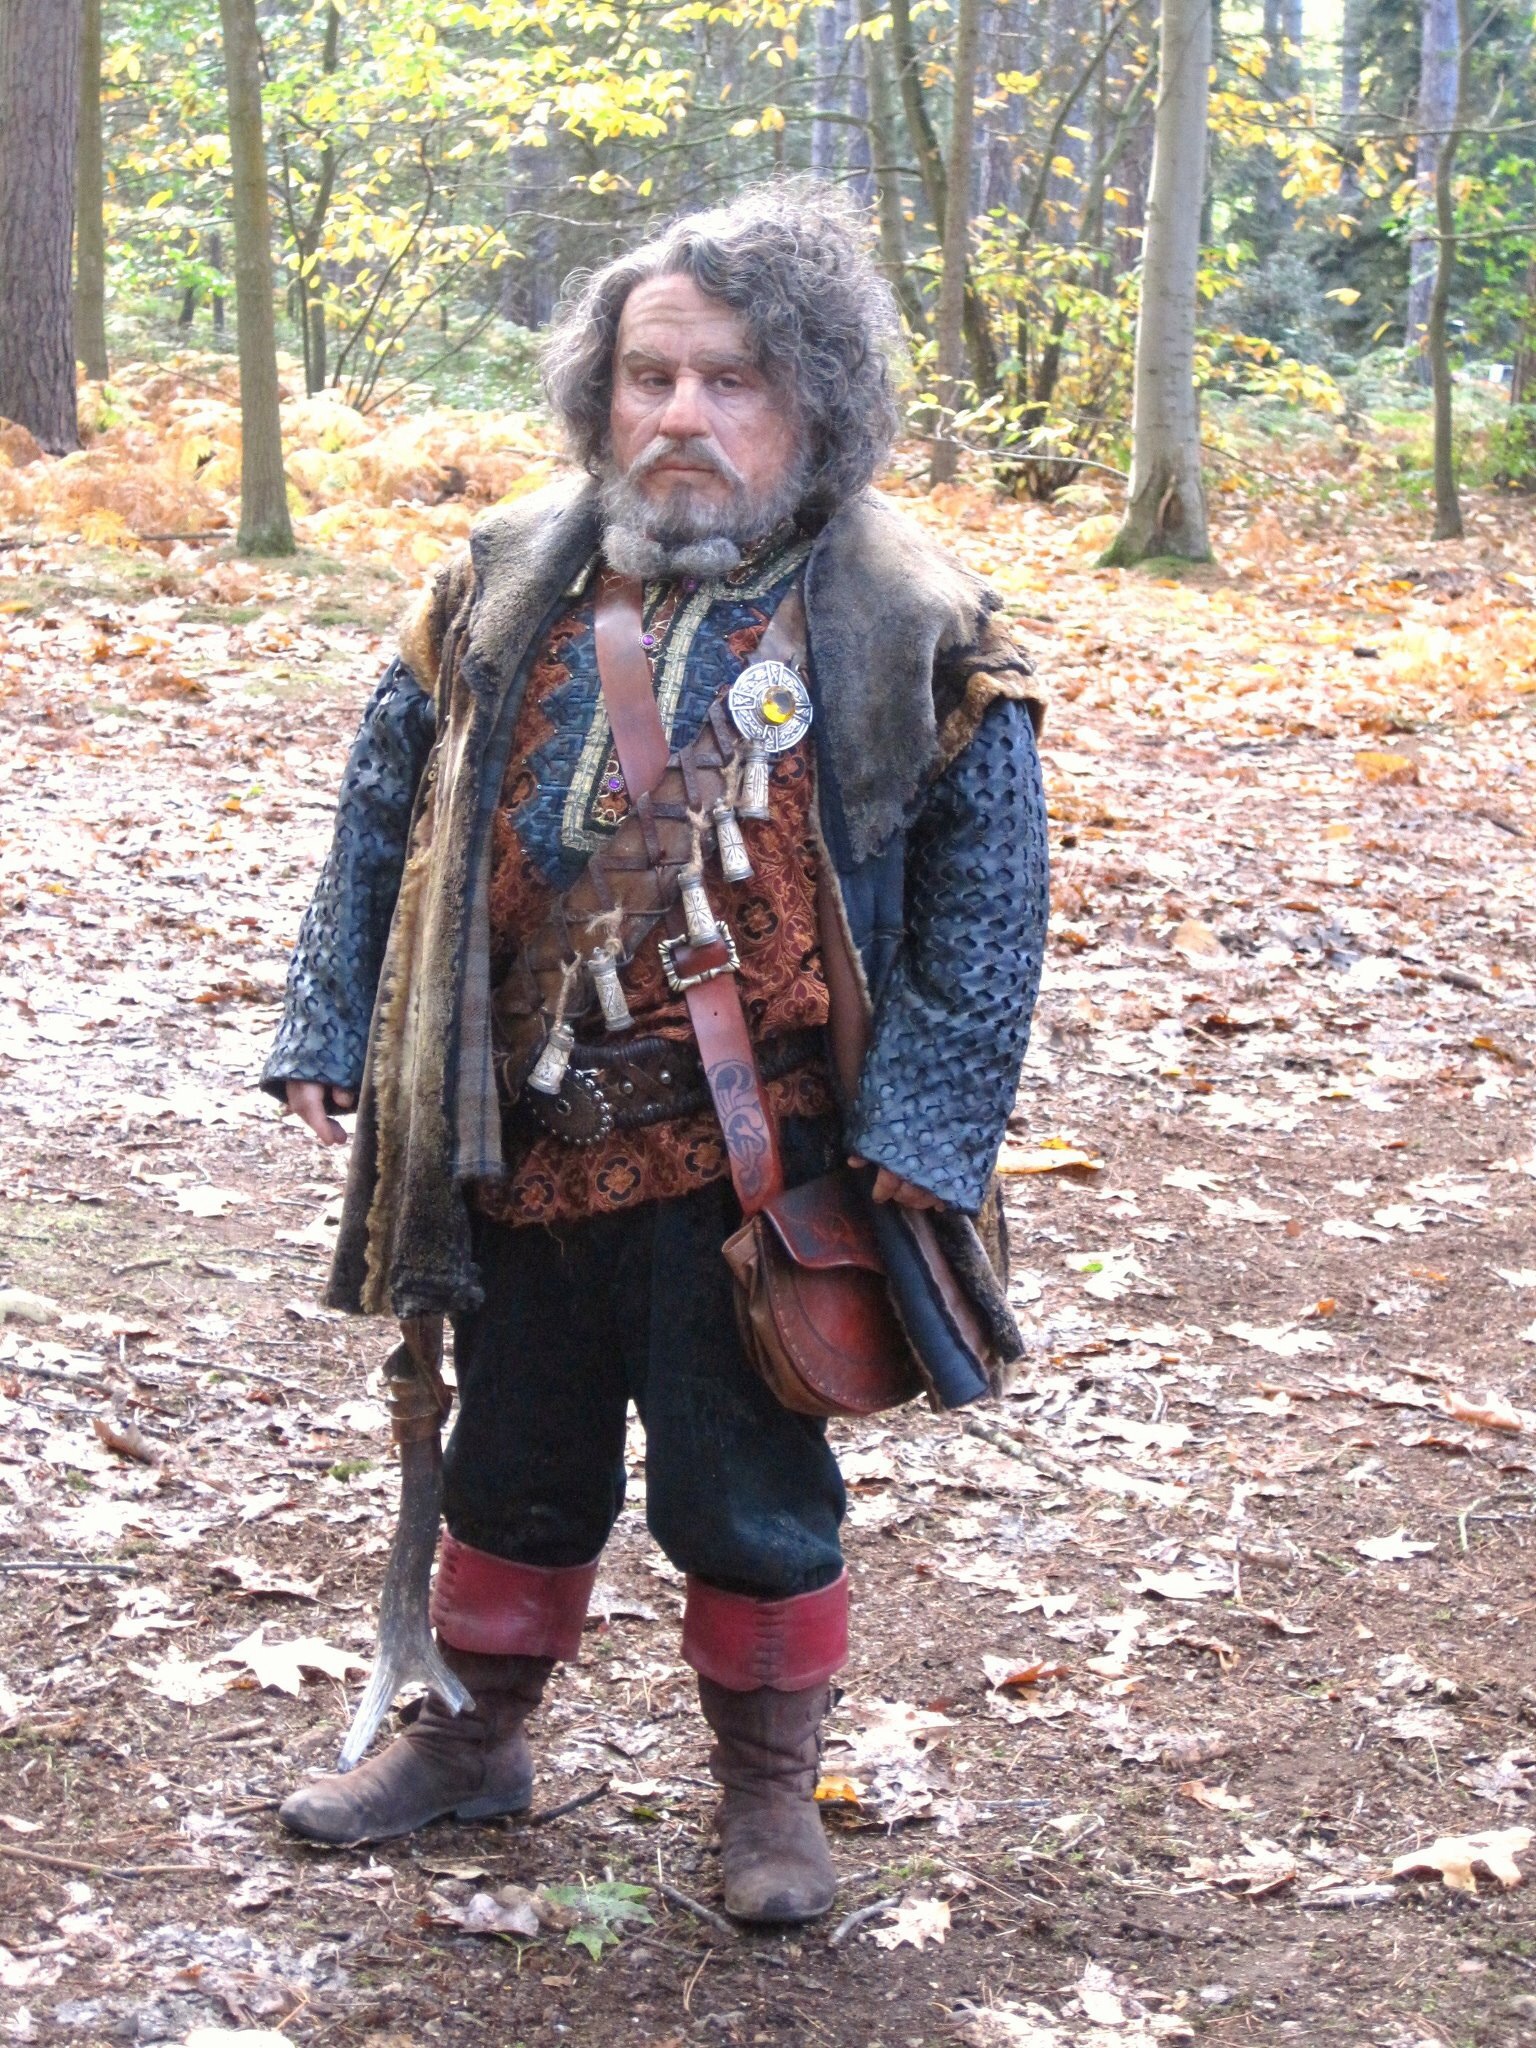 Jo Osmond as Ian McShane in Snow White and the Huntsman.